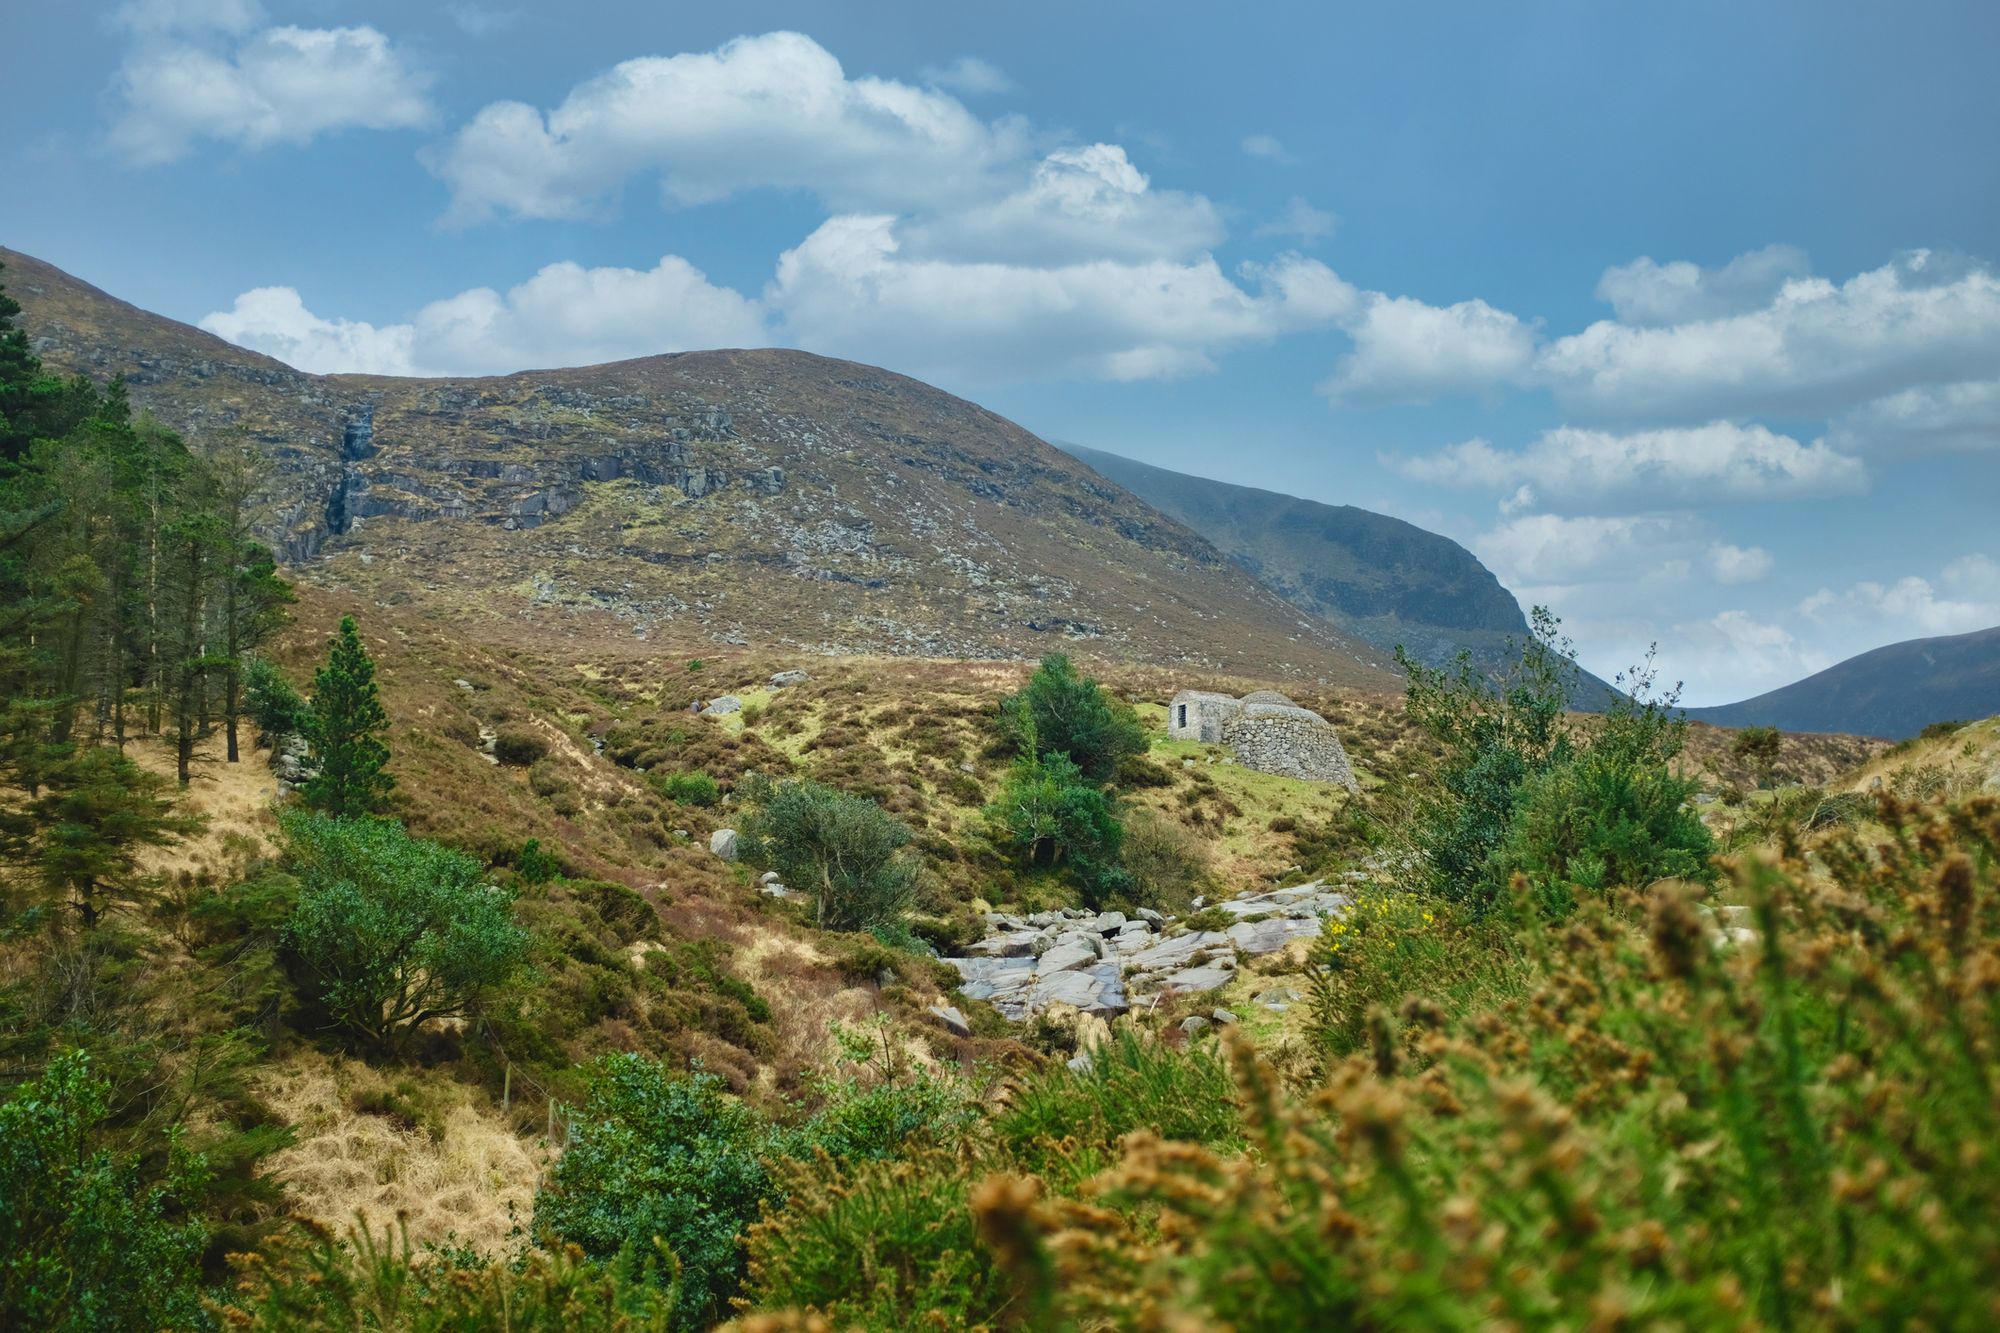 A view of Slieve Donard, the highest of the Mourne Mountains in Ireland.